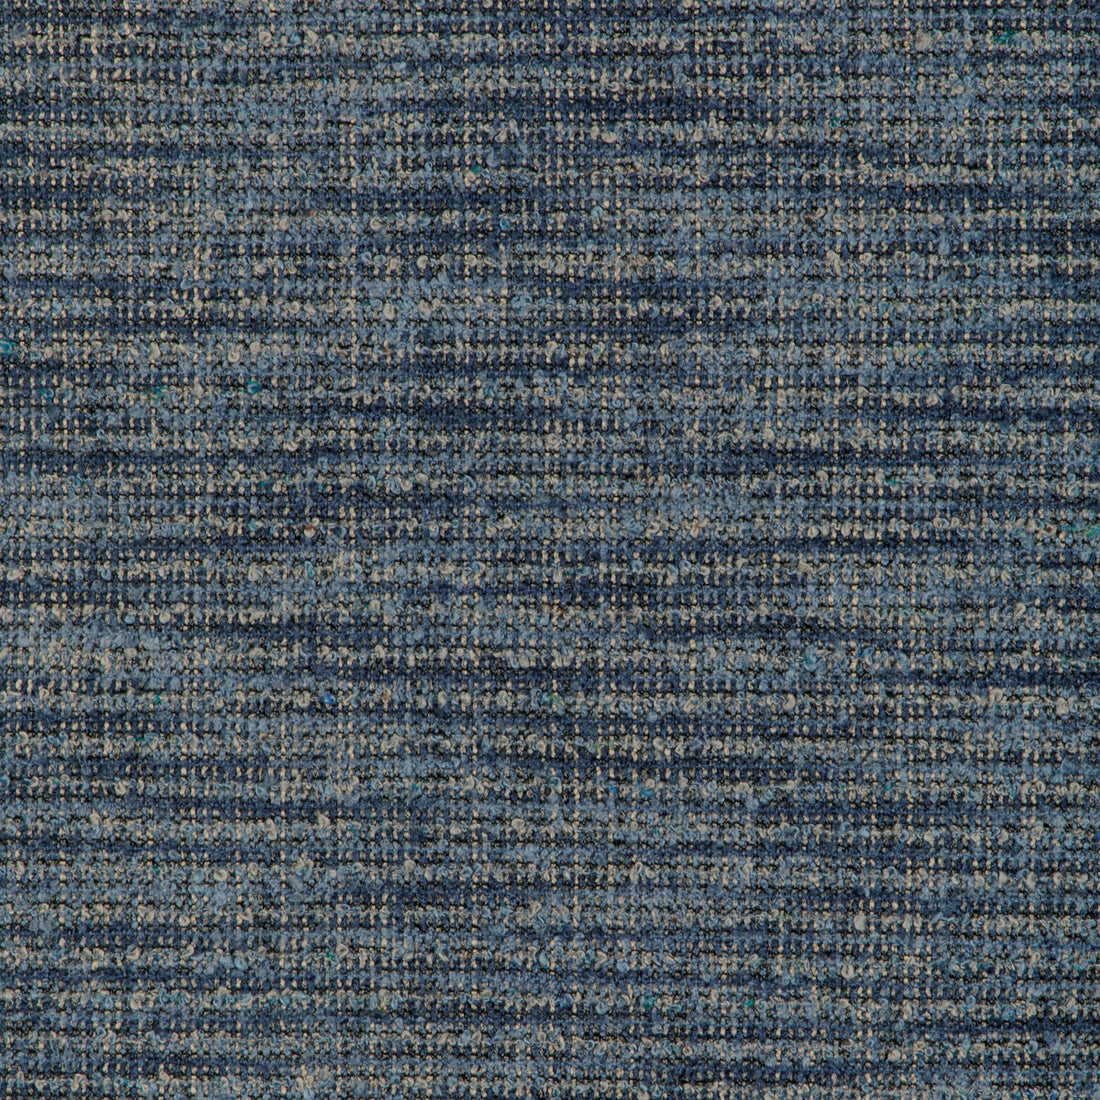 Kravet Design fabric in 37238-1511 color - pattern 37238.1511.0 - by Kravet Design in the Woven Colors collection